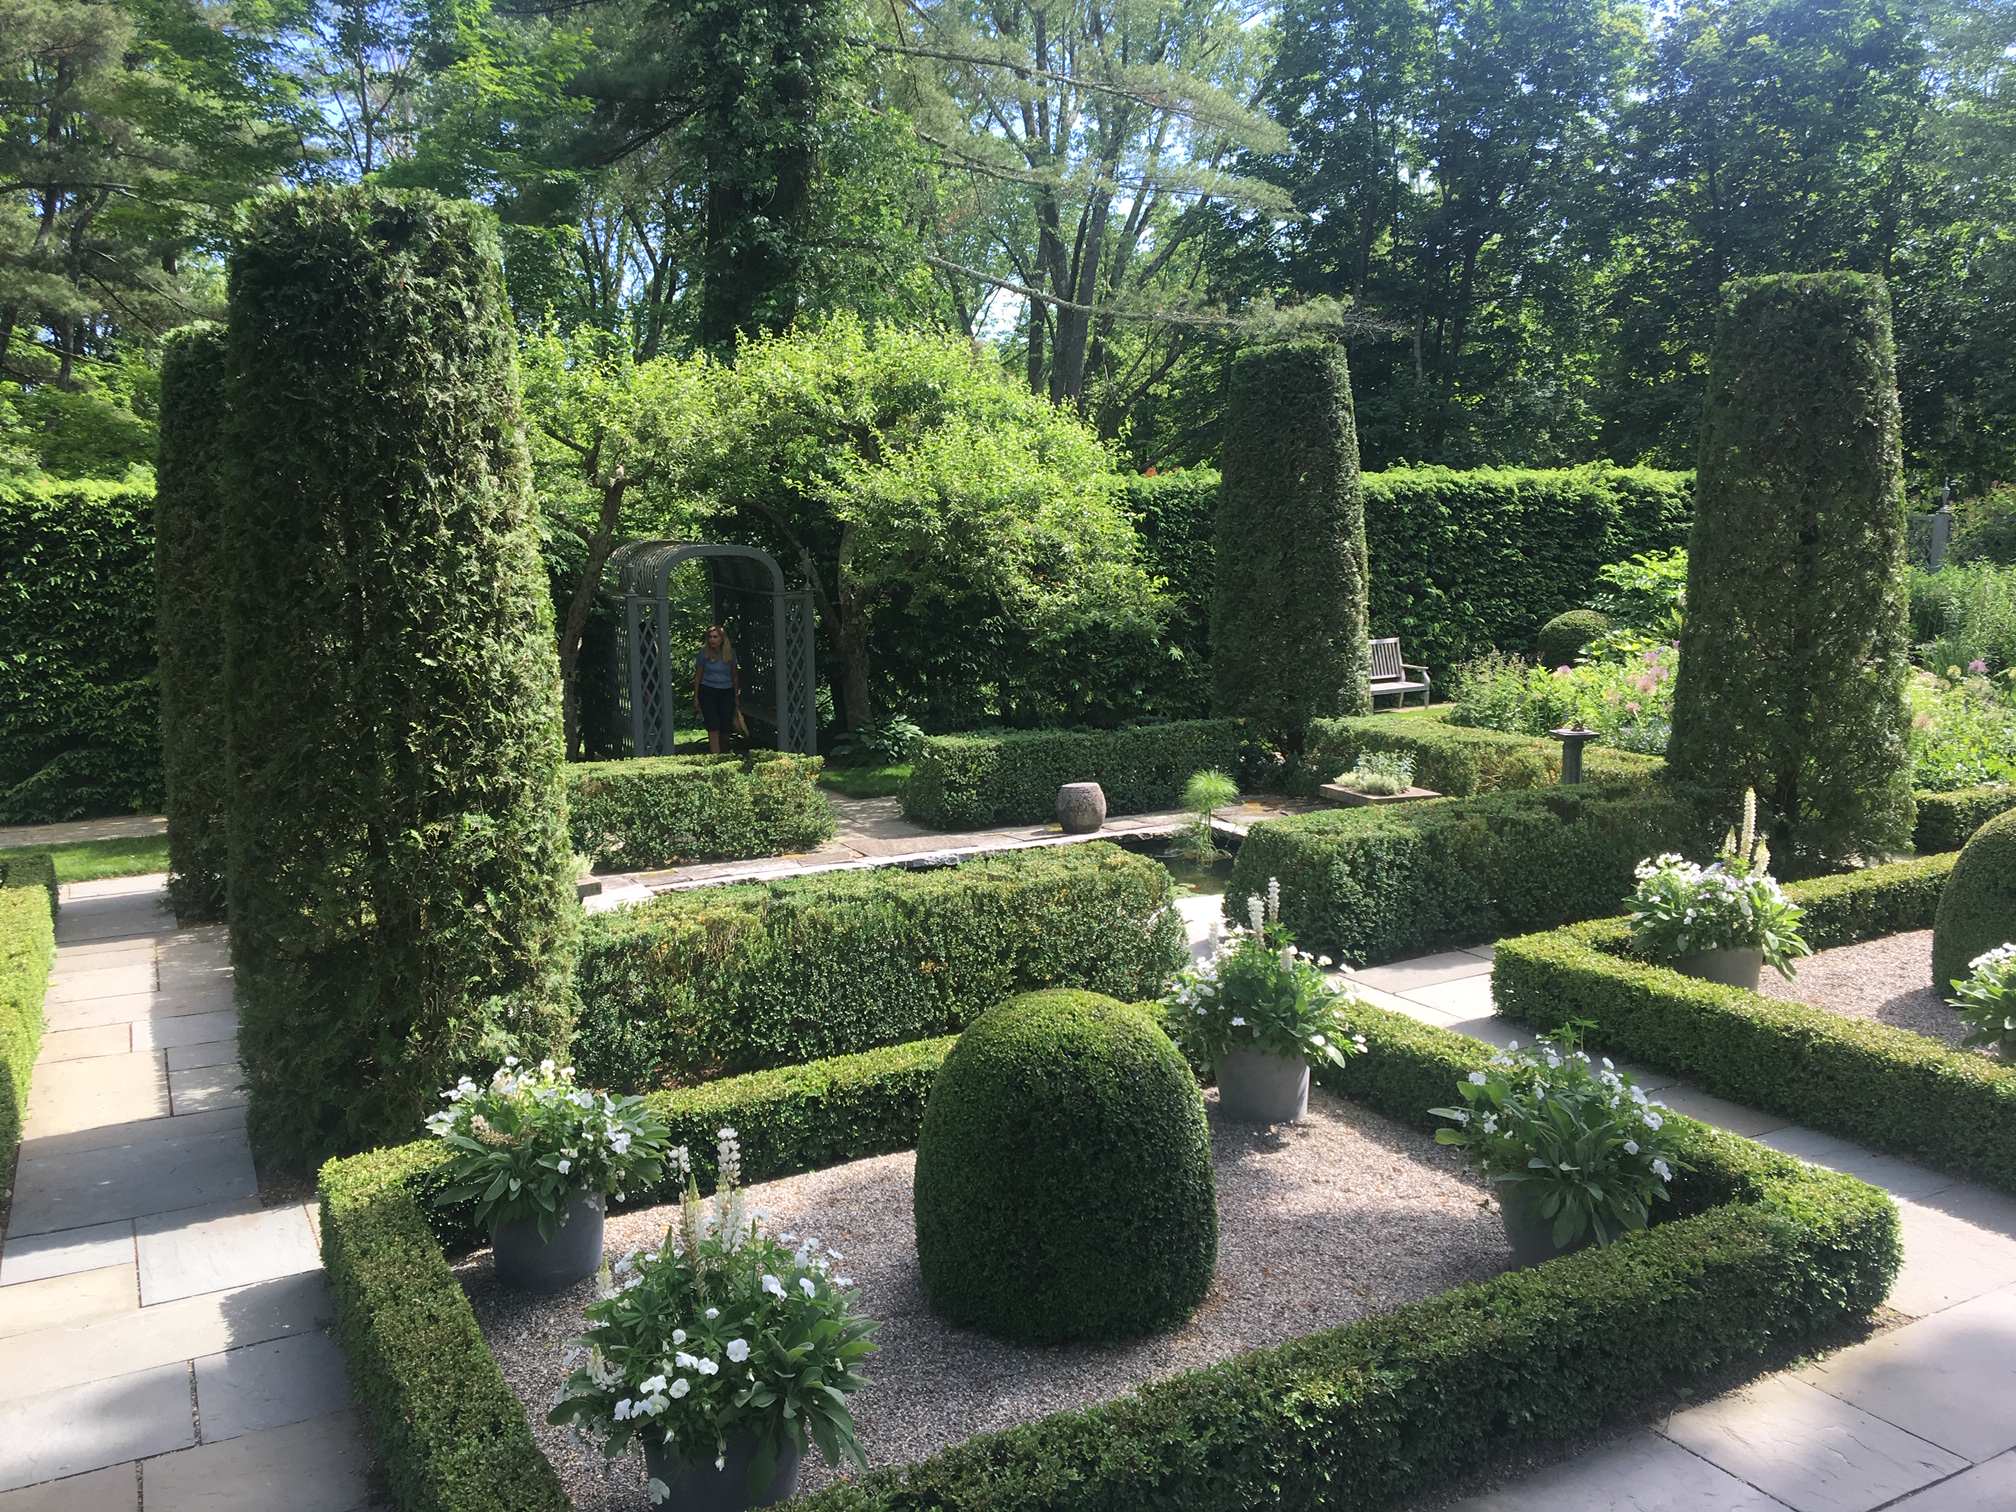 Formal Gardens with Boxwoods, Topiaries and Plants